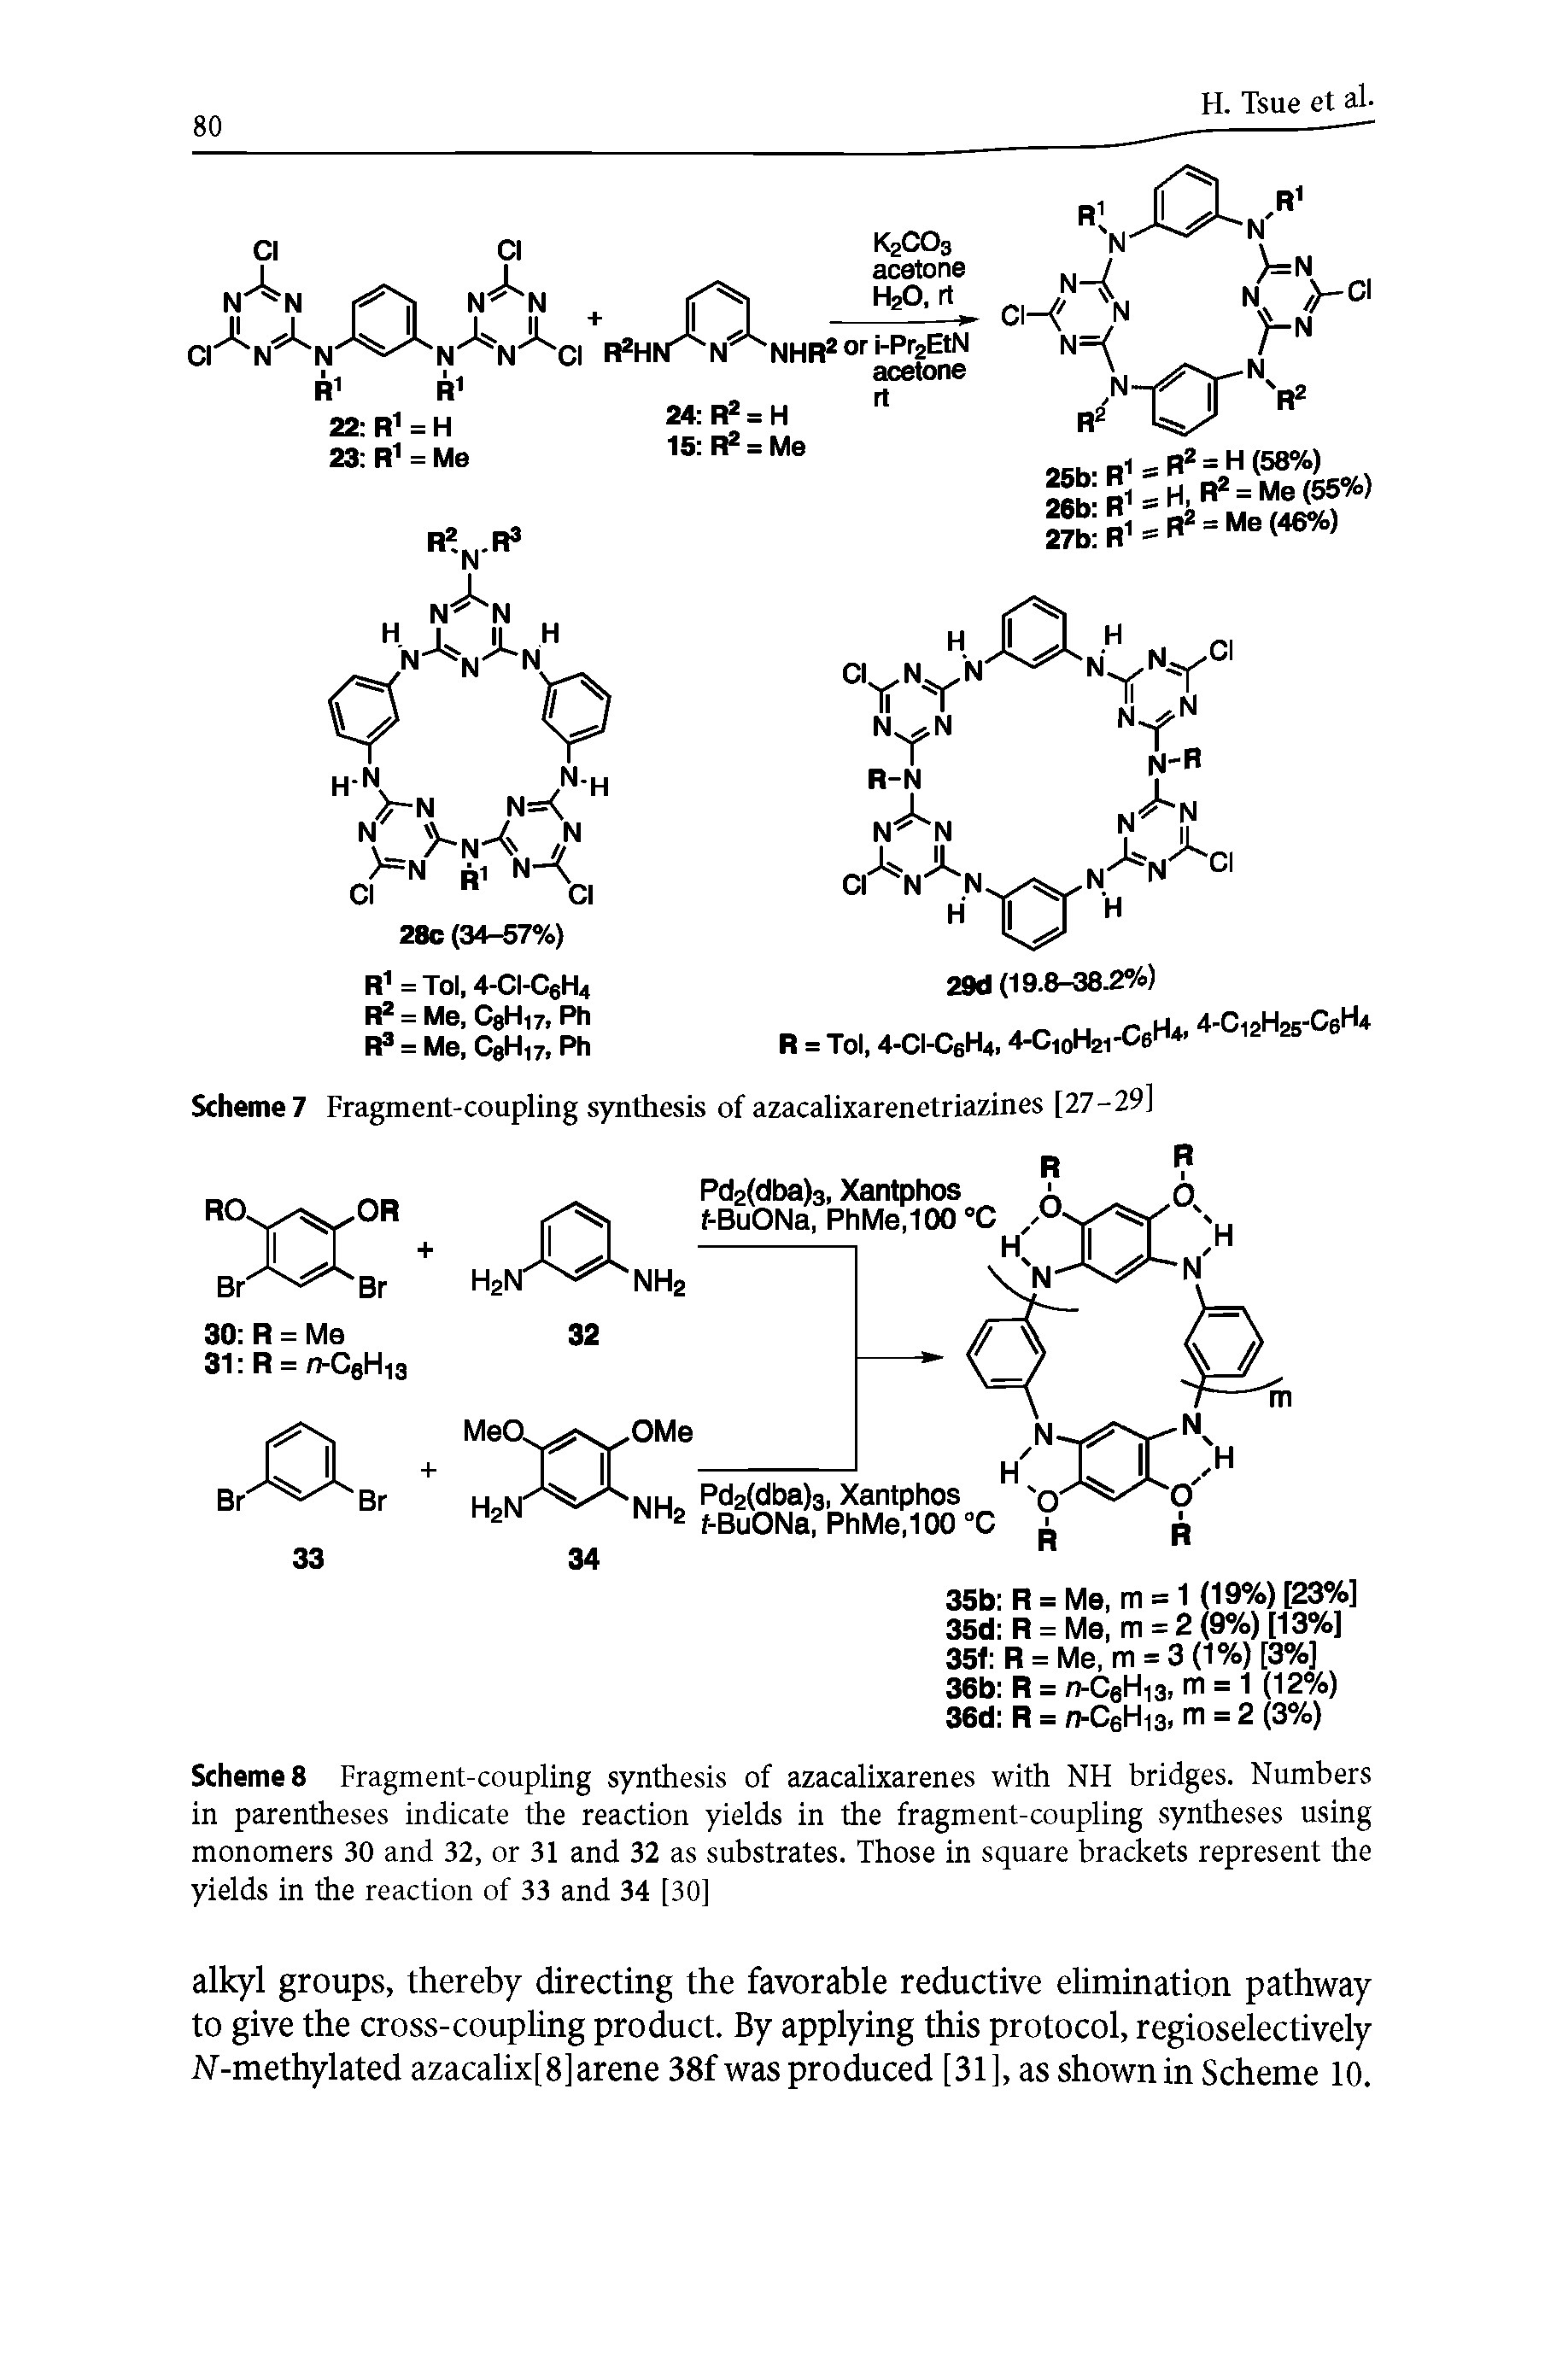 Schemes Fragment-coupling synthesis of azacalixarenes with NH bridges. Numbers in parentheses indicate the reaction yields in the fragment-coupling syntheses using monomers 30 and 32, or 31 and 32 as substrates. Those in square brackets represent the yields in the reaction of 33 and 34 [30]...